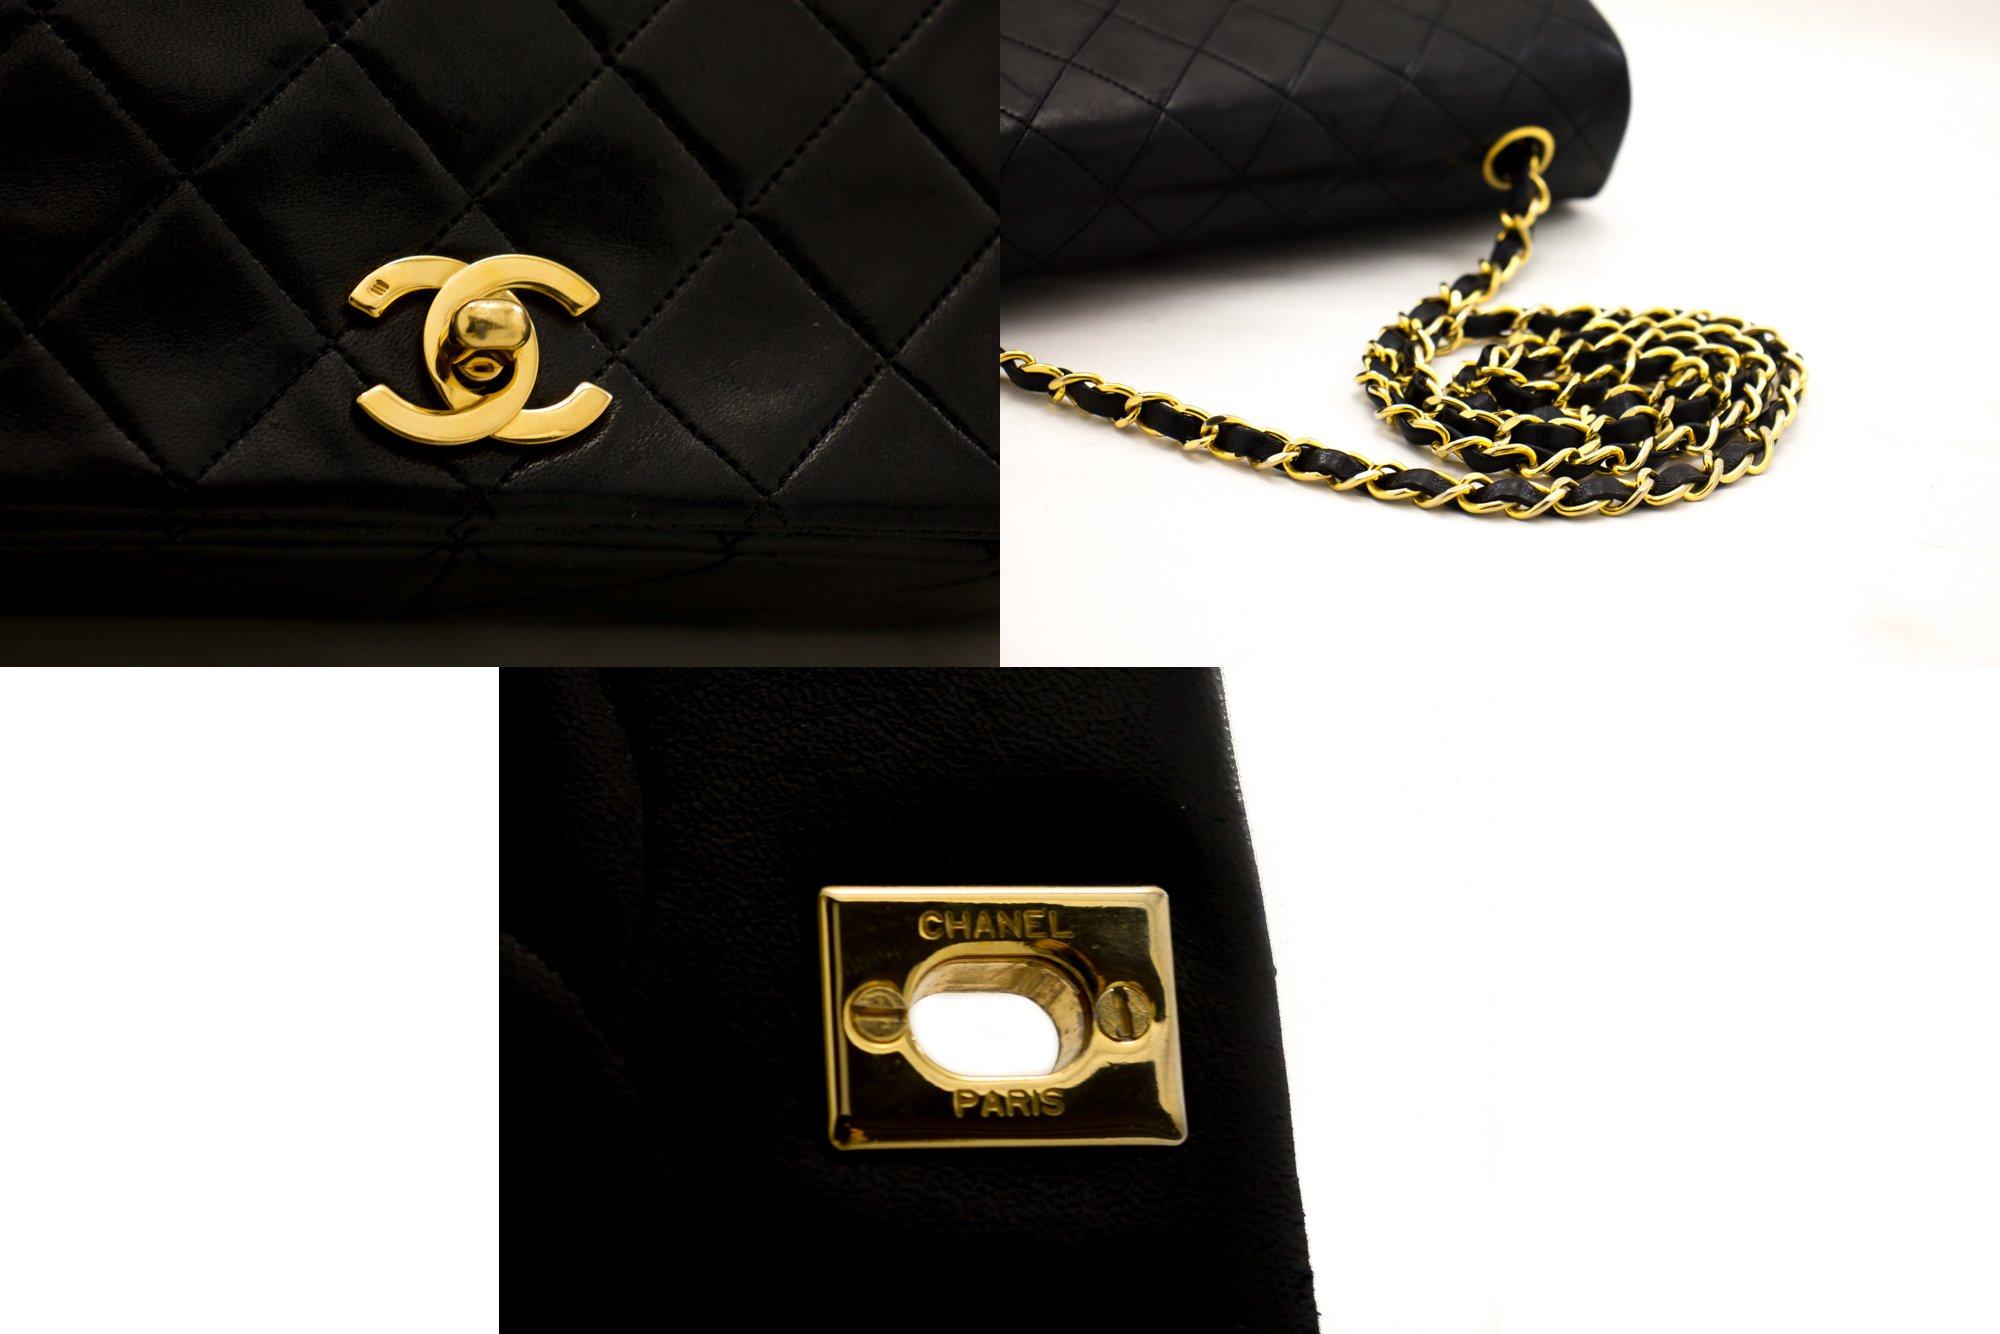 CHANEL Full Chain Flap Shoulder Bag Black Quilted Lambskin 3